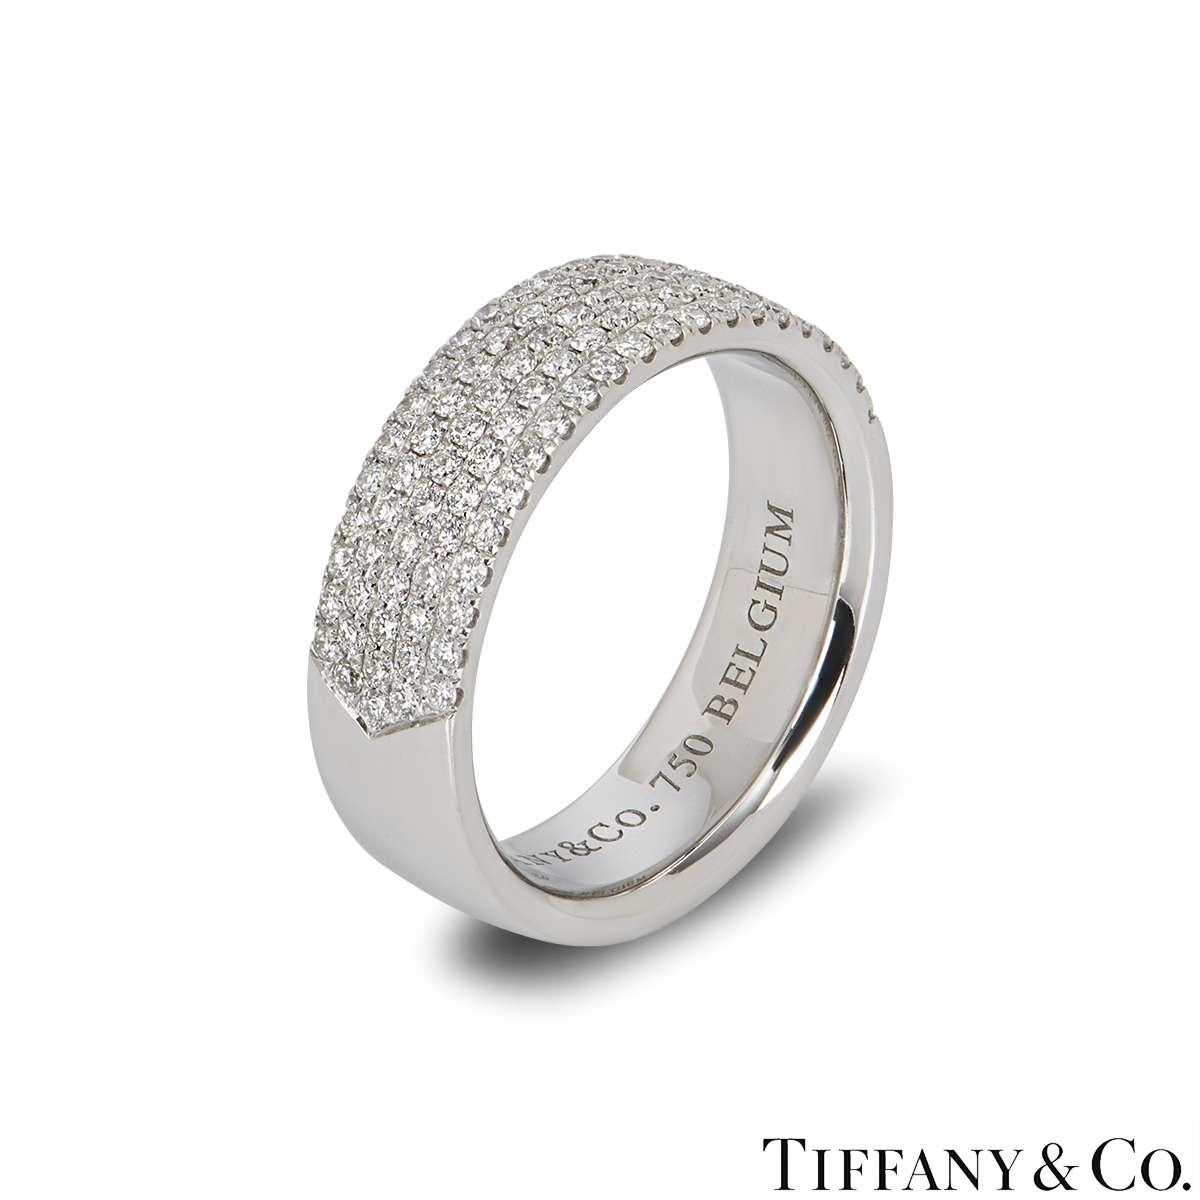 A beautiful 18k white gold Tiffany & Co. diamond band ring. The ring comprises of 5 rows of round brilliant cut diamonds half way around the band with a total weight of 0.76ct, G colour and VS clarity. The ring is a 6mm court fit style band